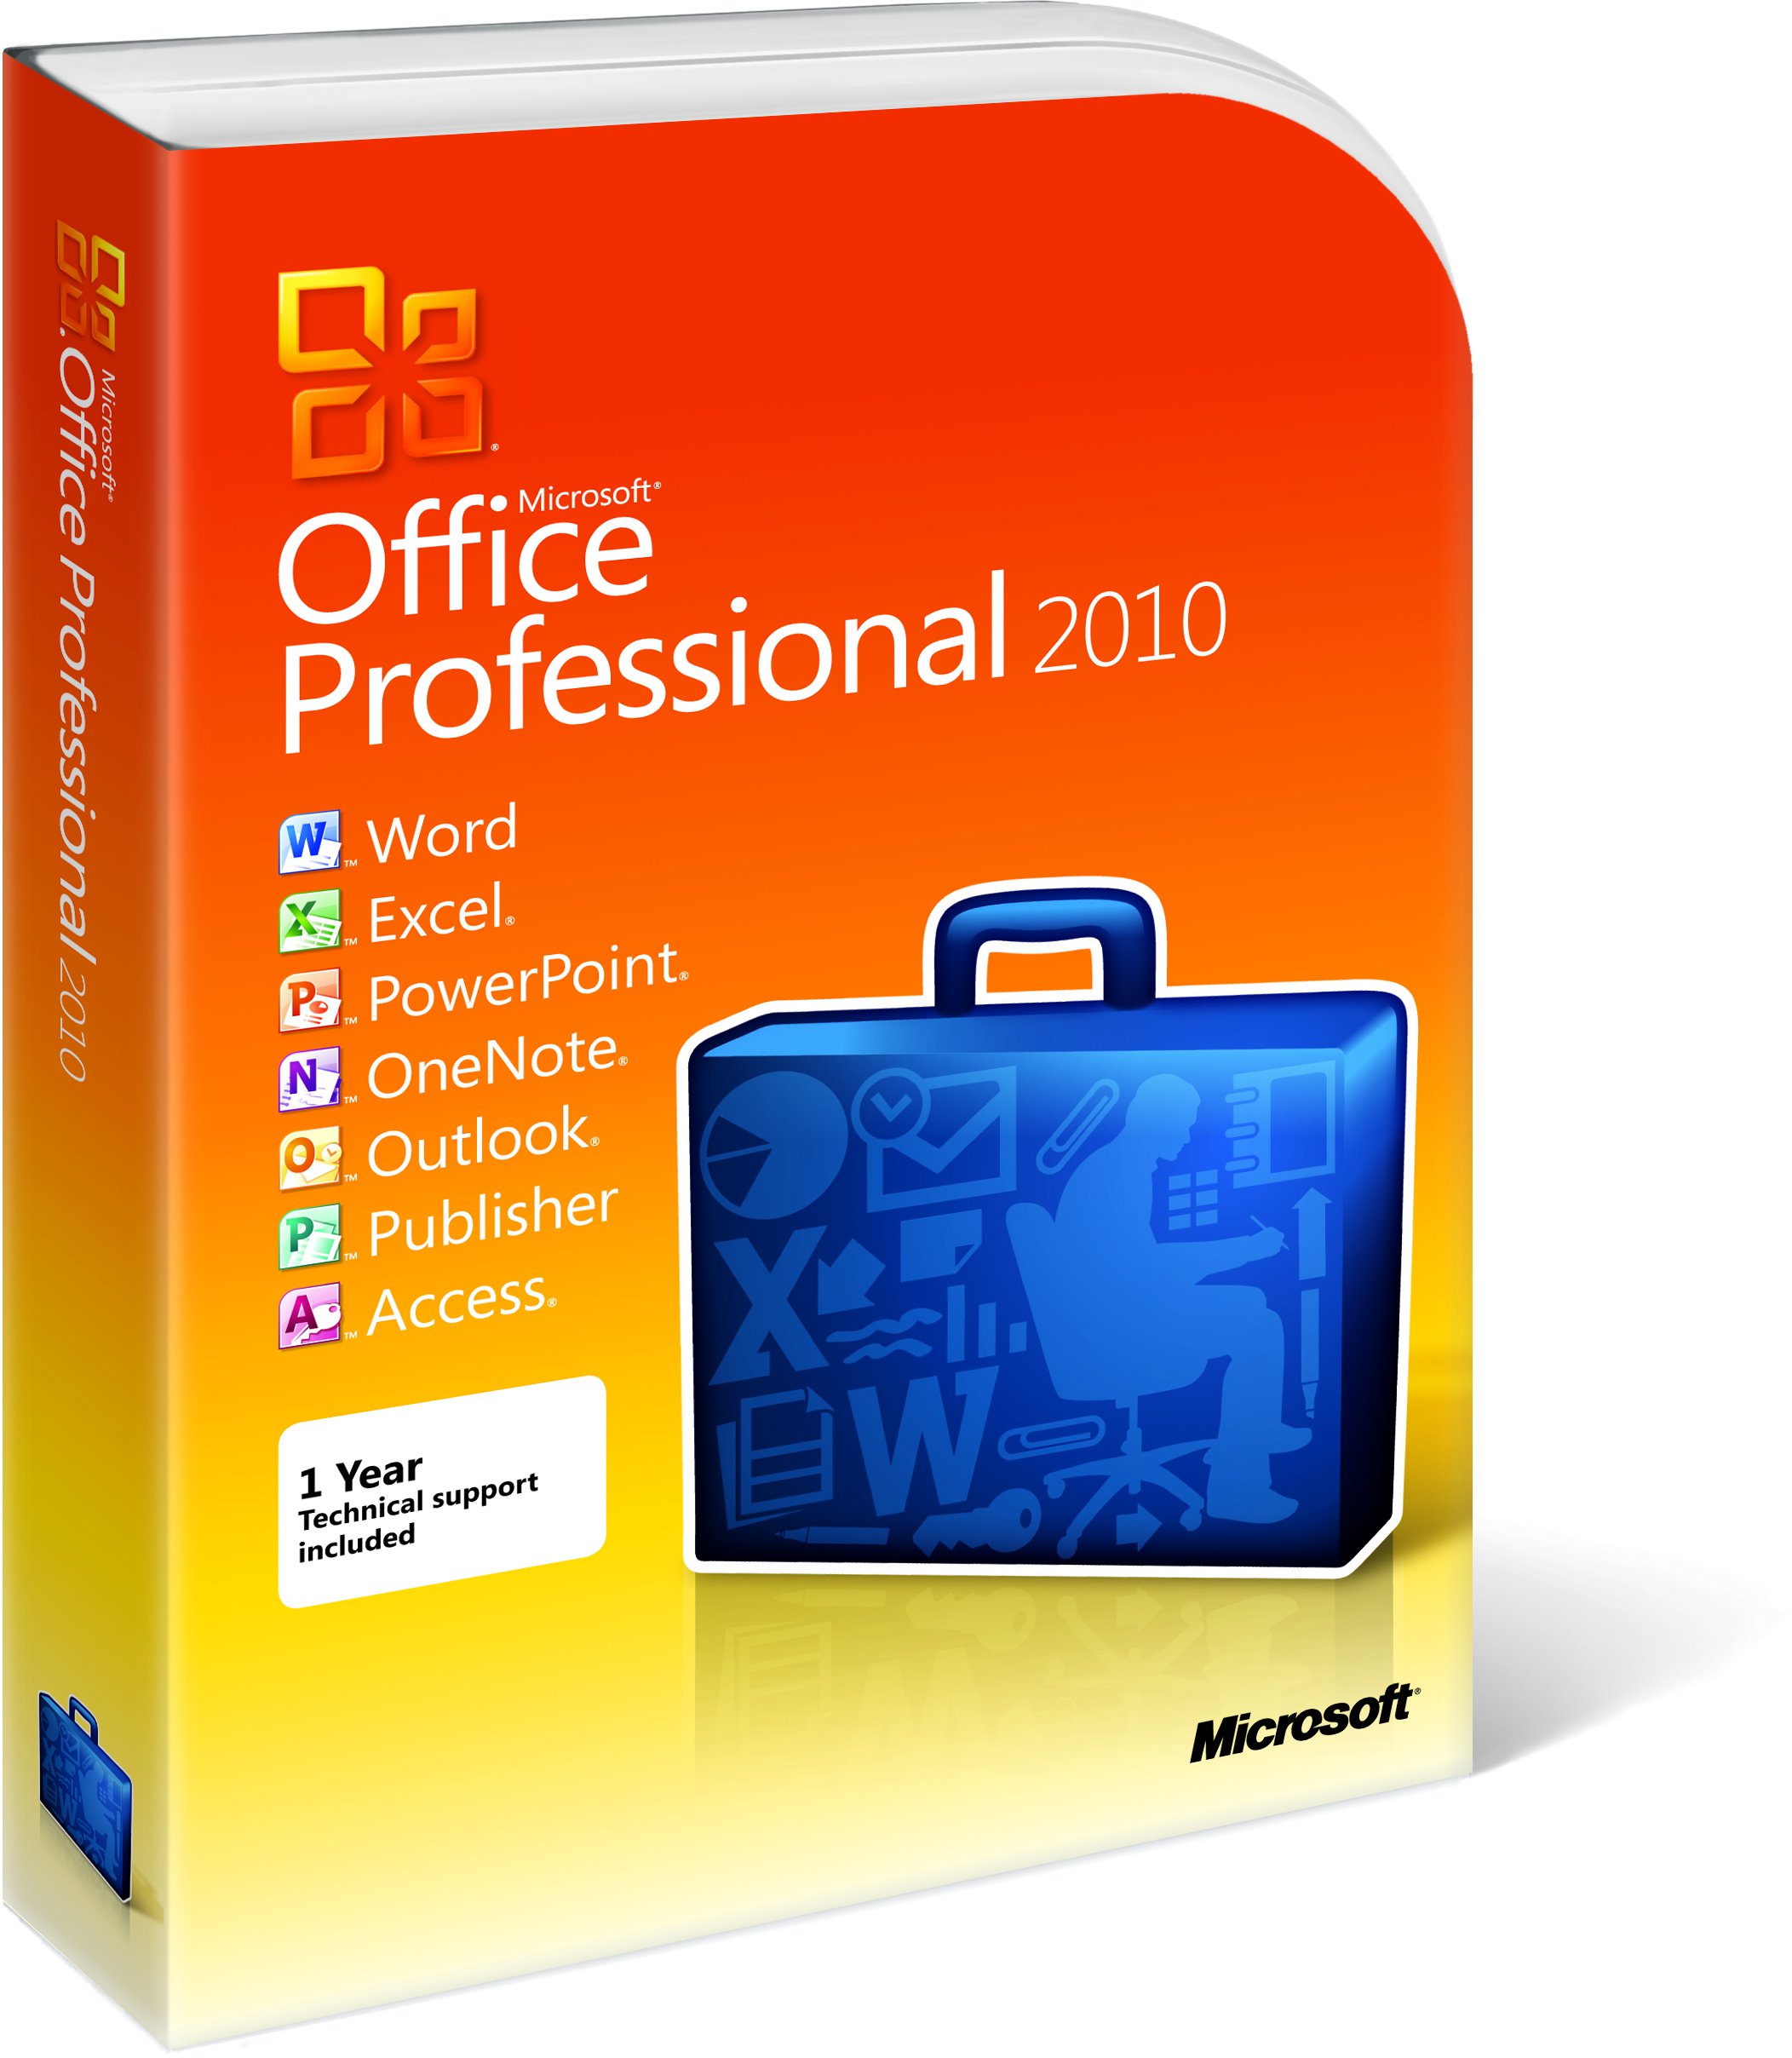 Office 2010 Professional Free Download - ALL PC World